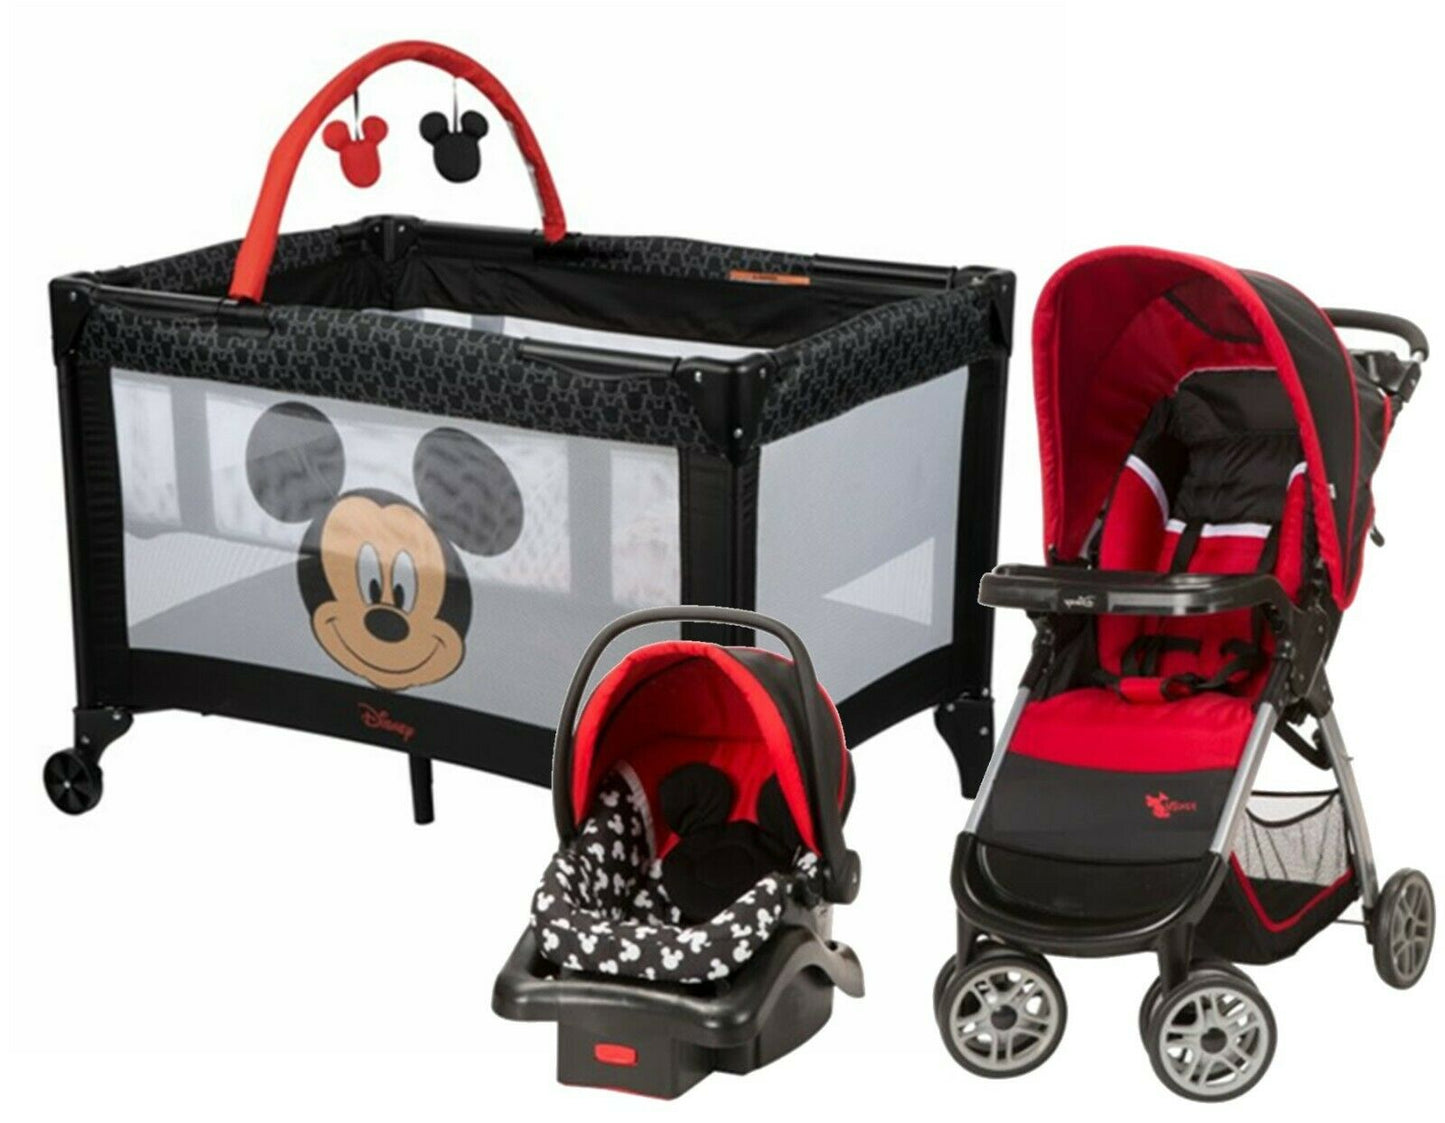 Disney Baby Stroller with Car Seat Travel System Newborn Infant Playard Combo